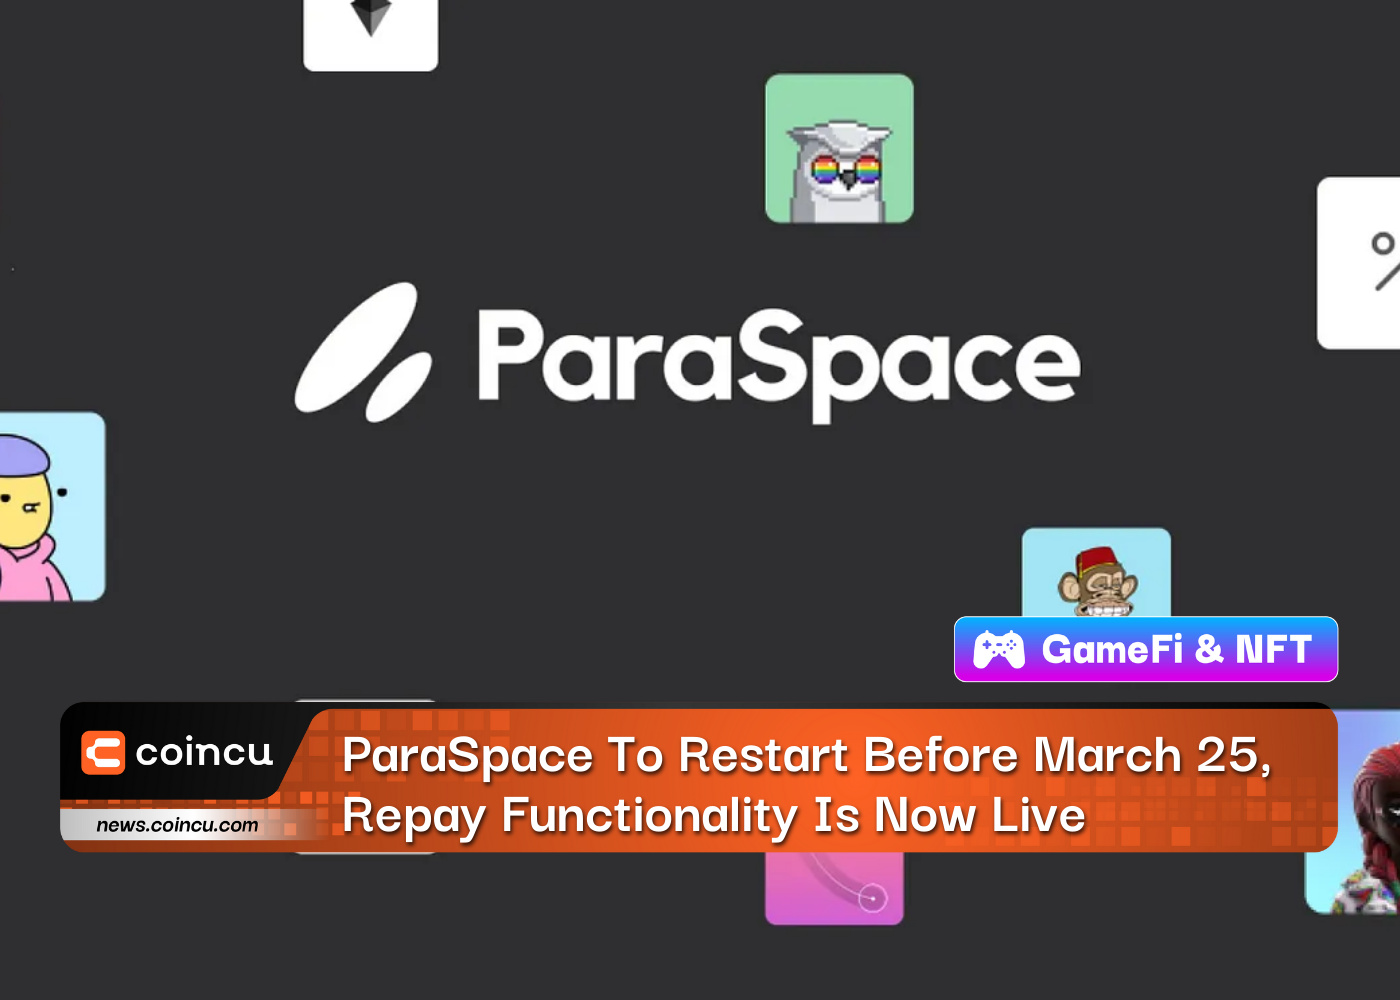 ParaSpace To Restart Before March 25, Repay Functionality Is Now Live